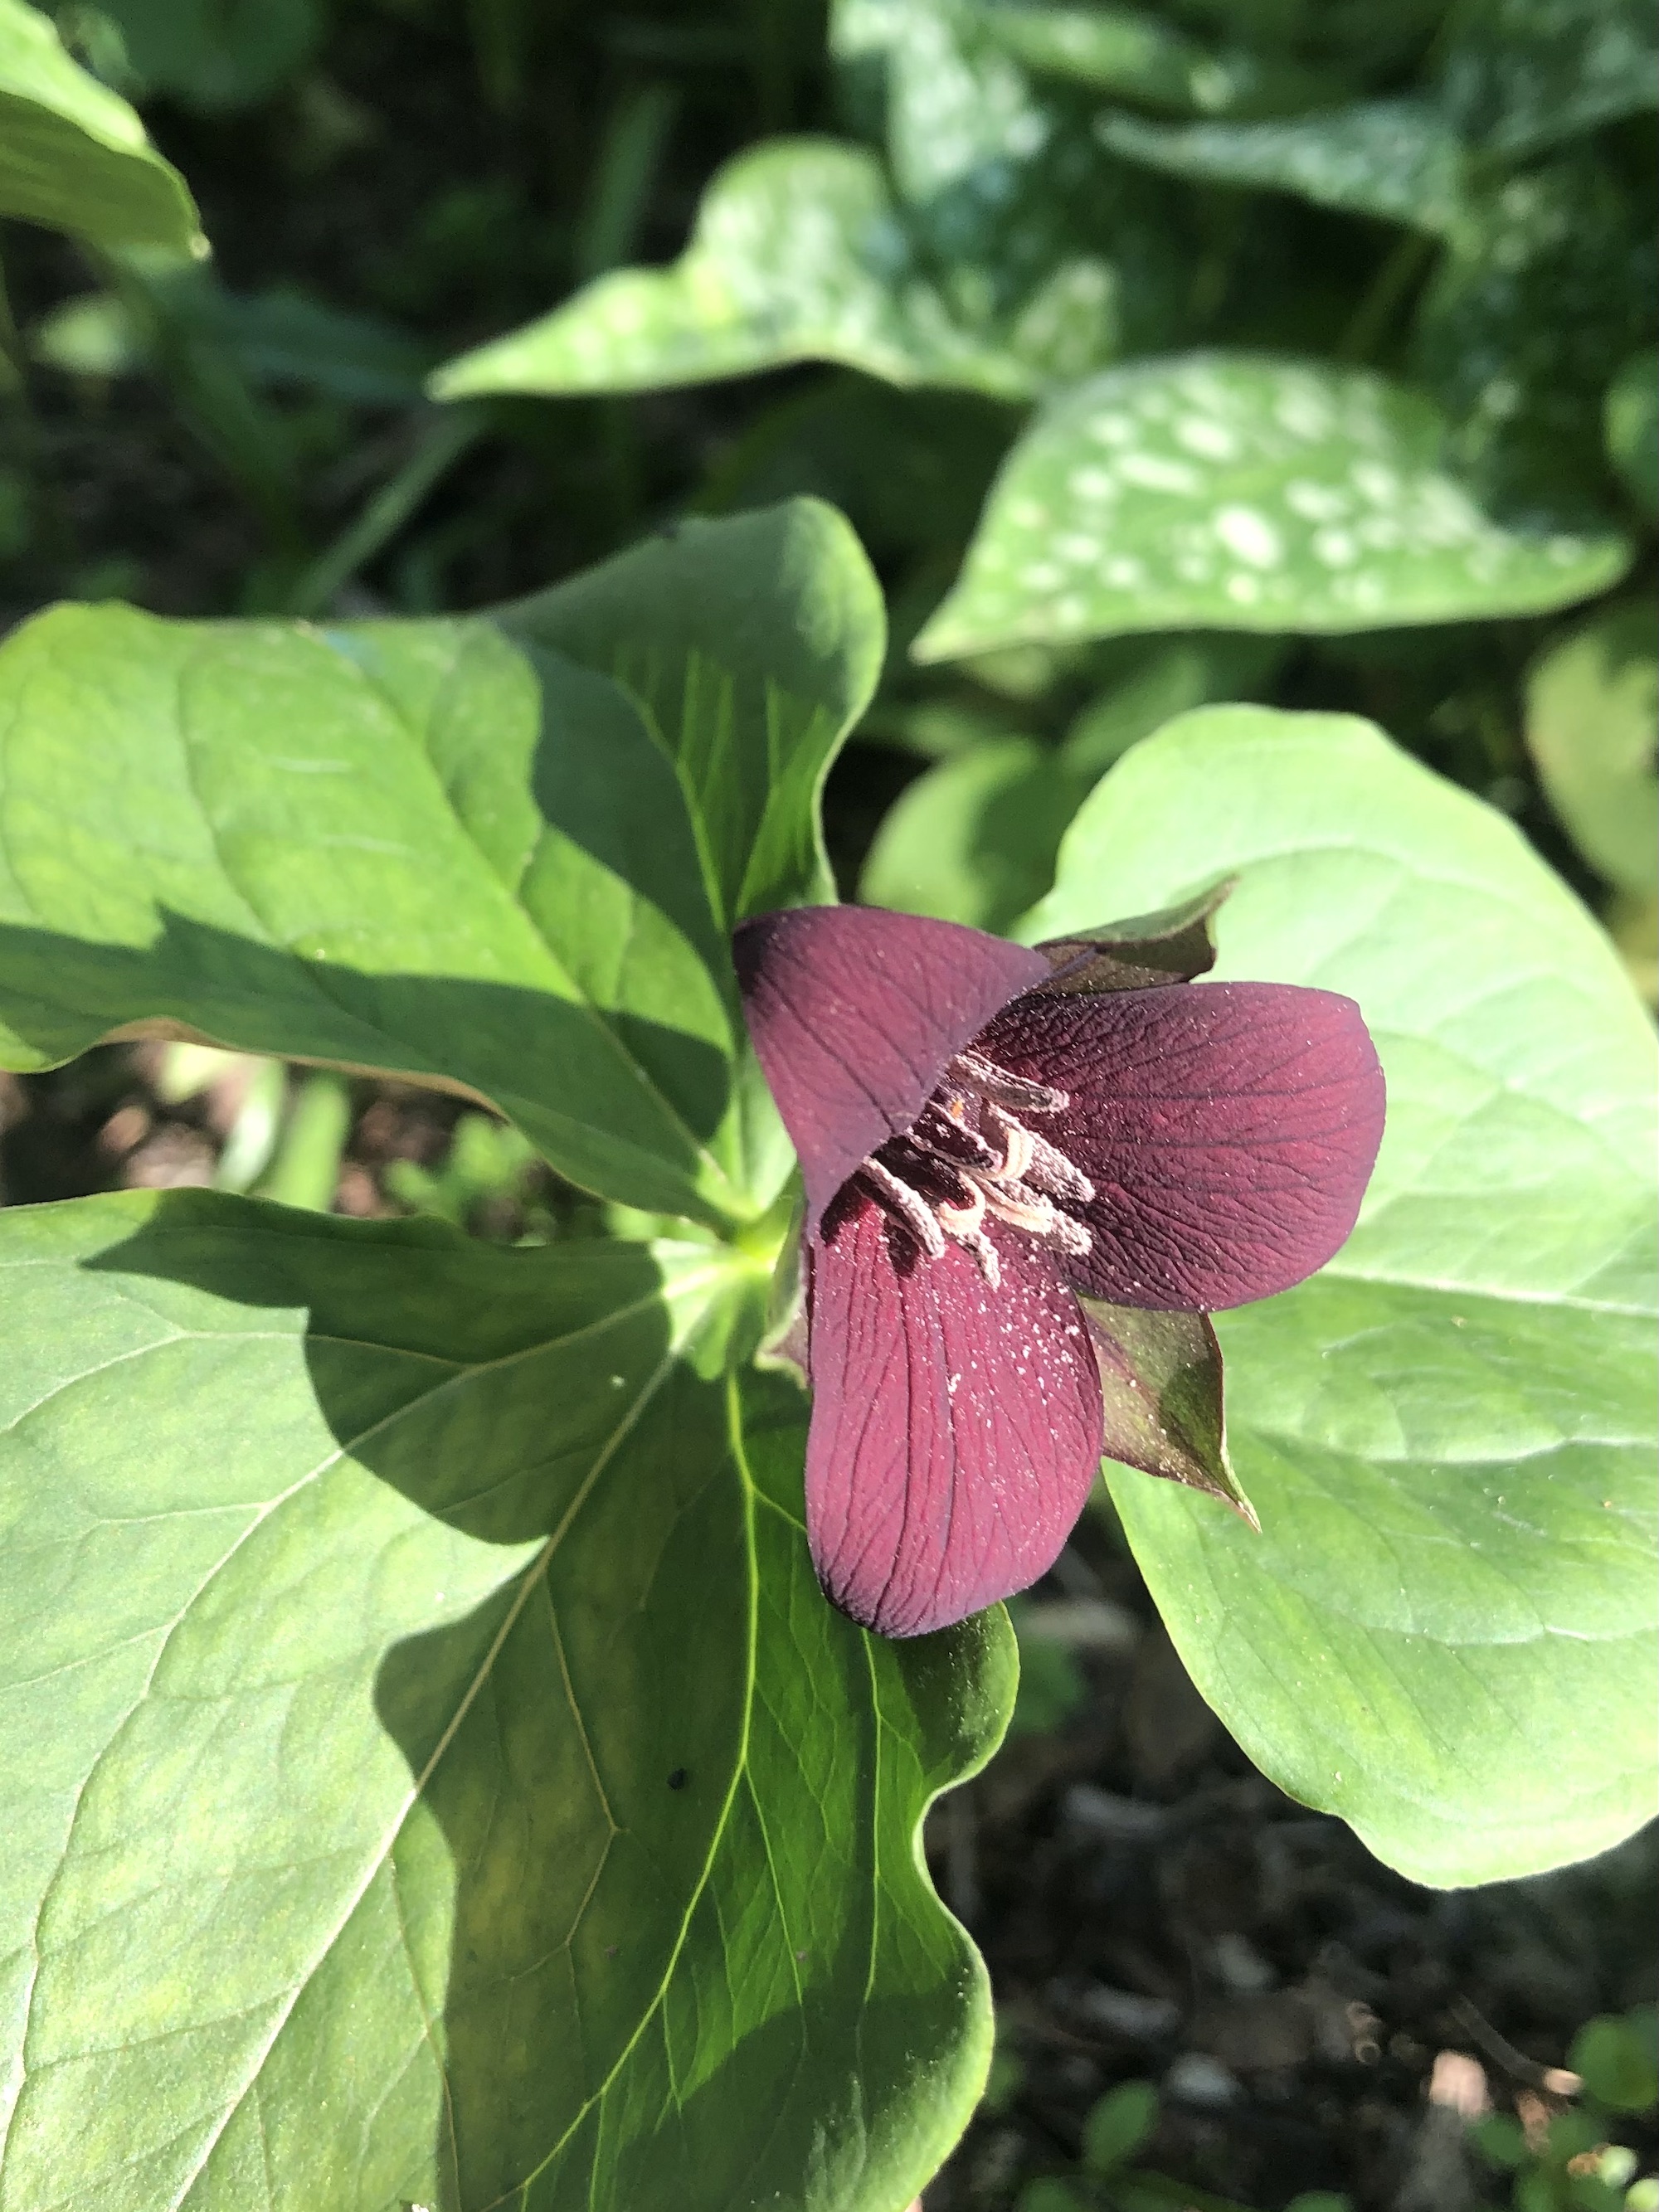 Red Trillium in Nakoma garden in Madison, Wisconsin on May 15, 2022.